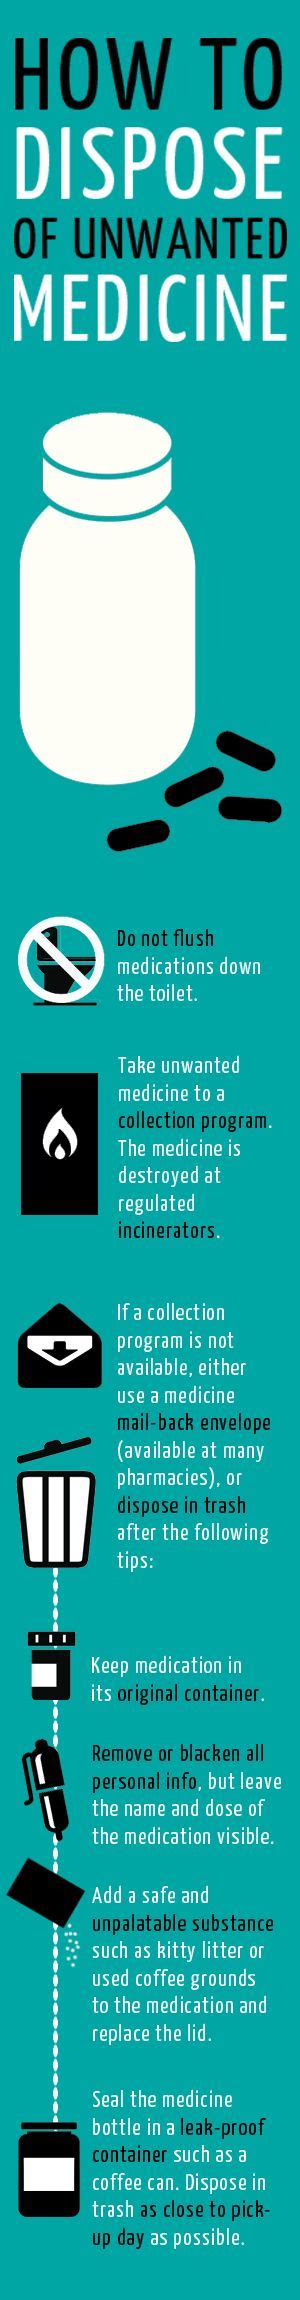 14 Best Medication Disposal Images On Pinterest Infographic